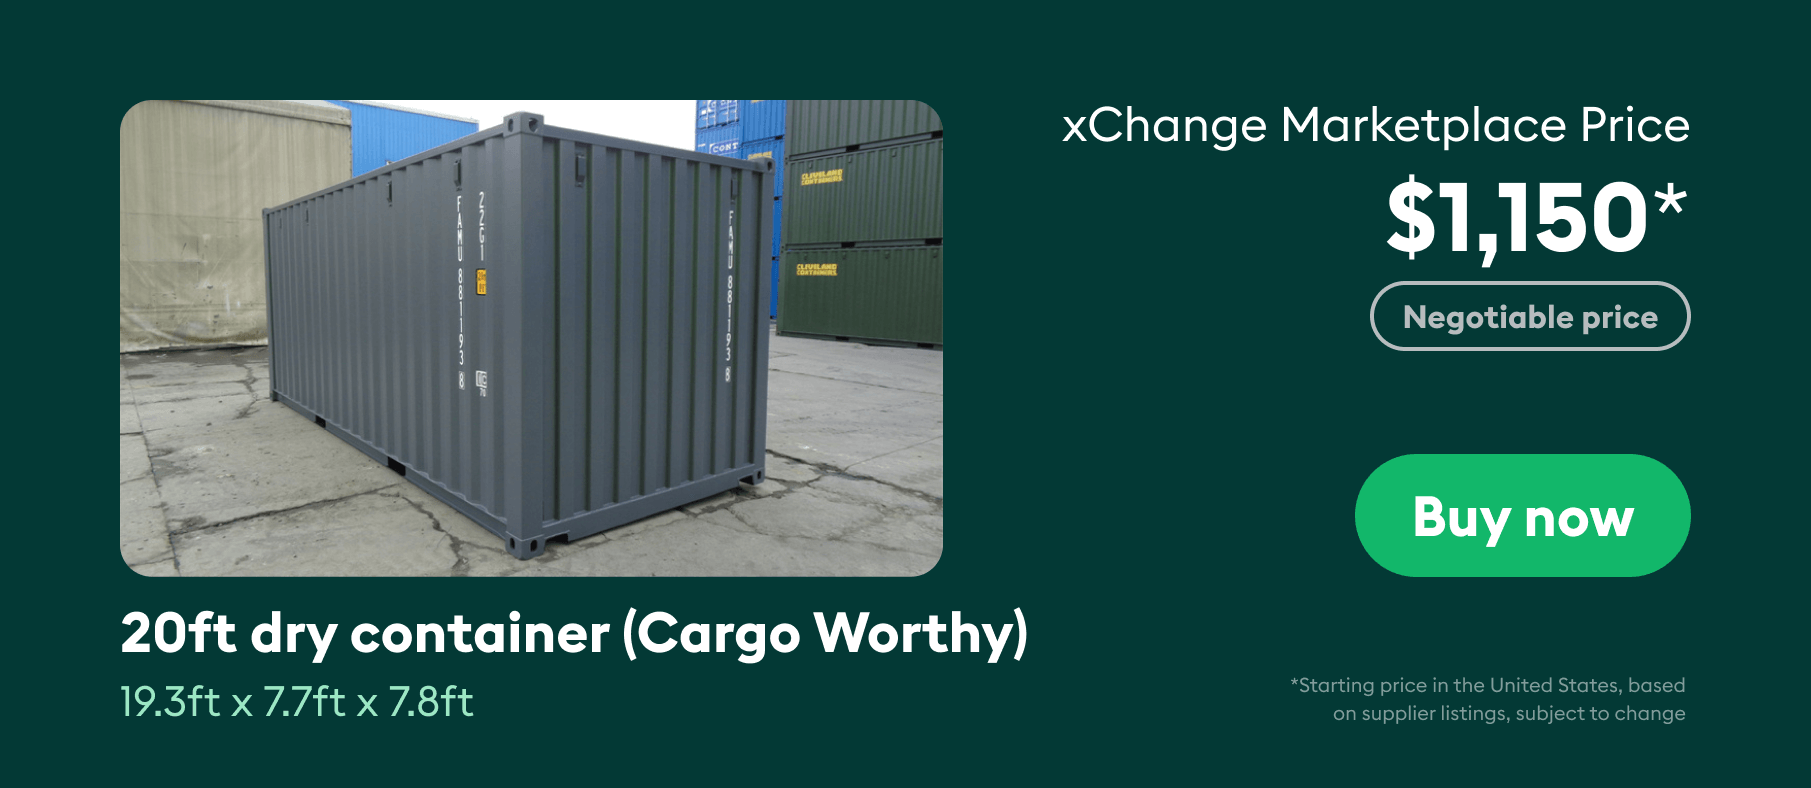 The xChange marketplace price of 20ft used (cargo worthy) container is $1,150 and is negotiable.